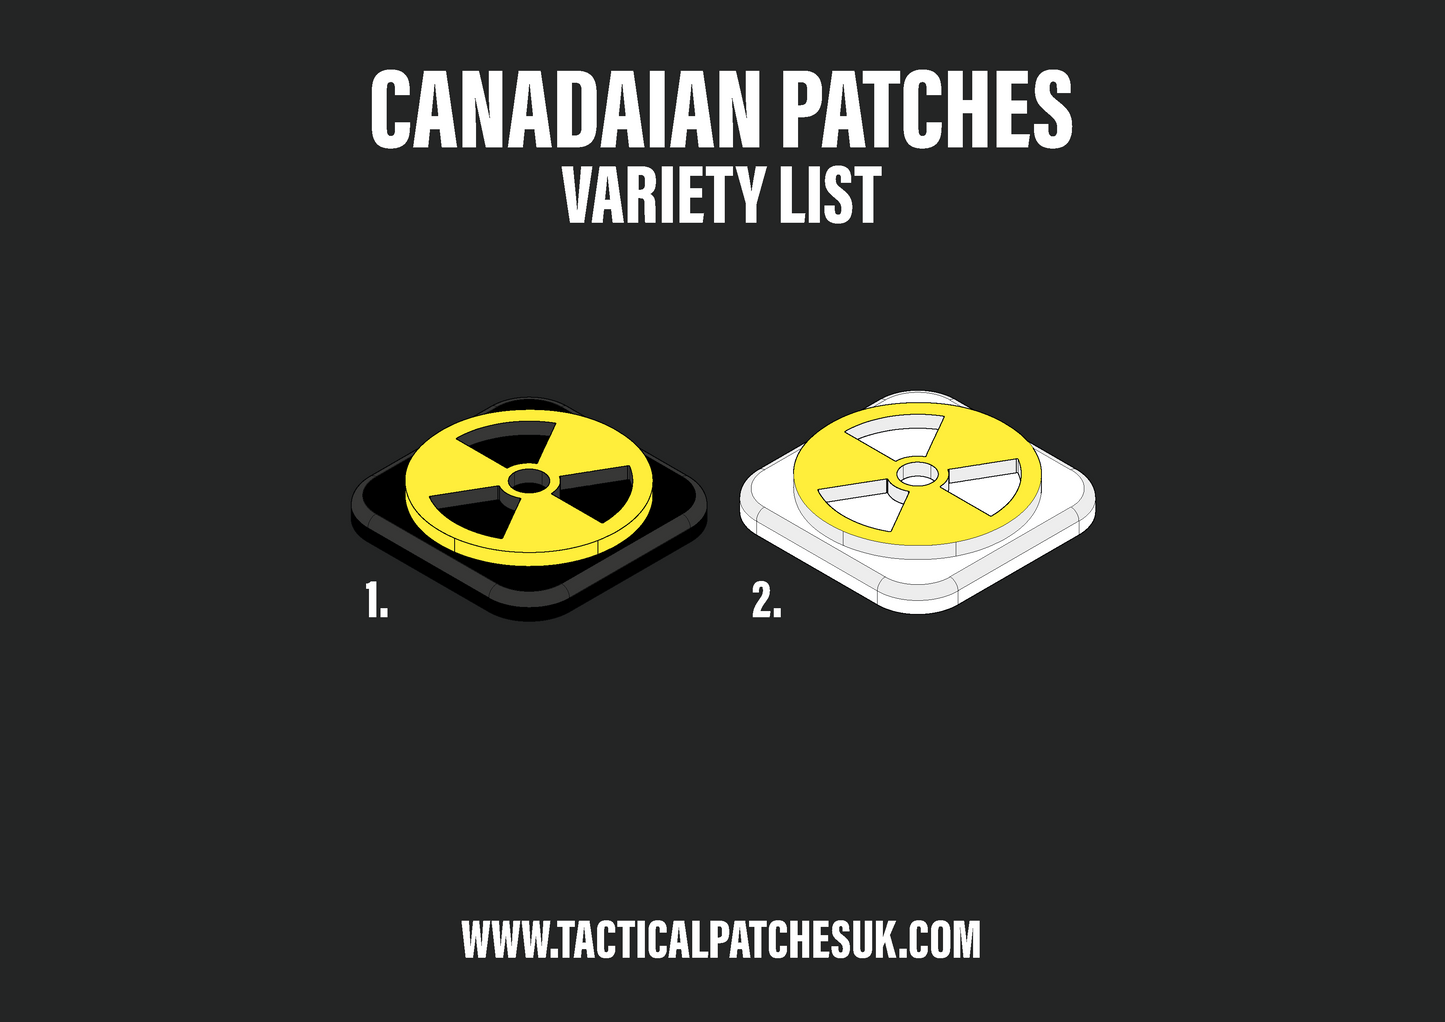 Nuclear Velcro Patches - 1x1